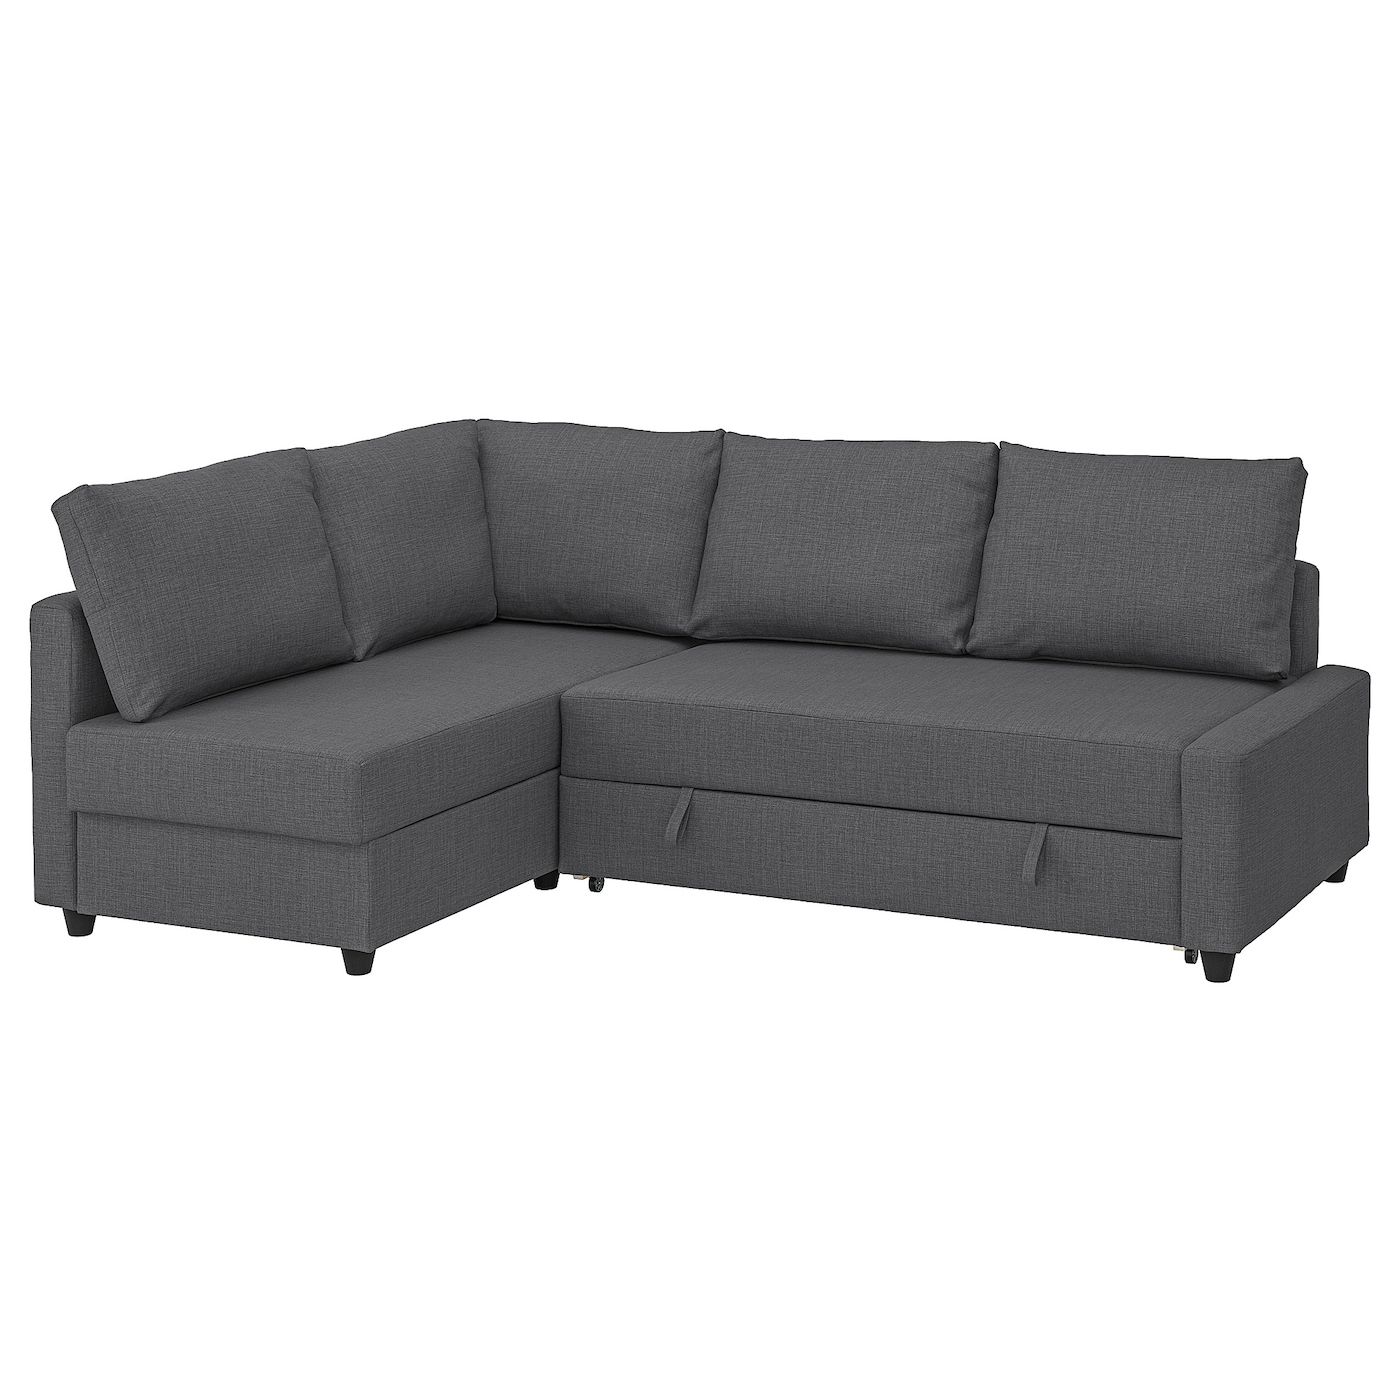 Friheten Corner Sofa Bed With Storage – With Extra Back Intended For Ikea Corner Sofas With Storage (View 11 of 15)